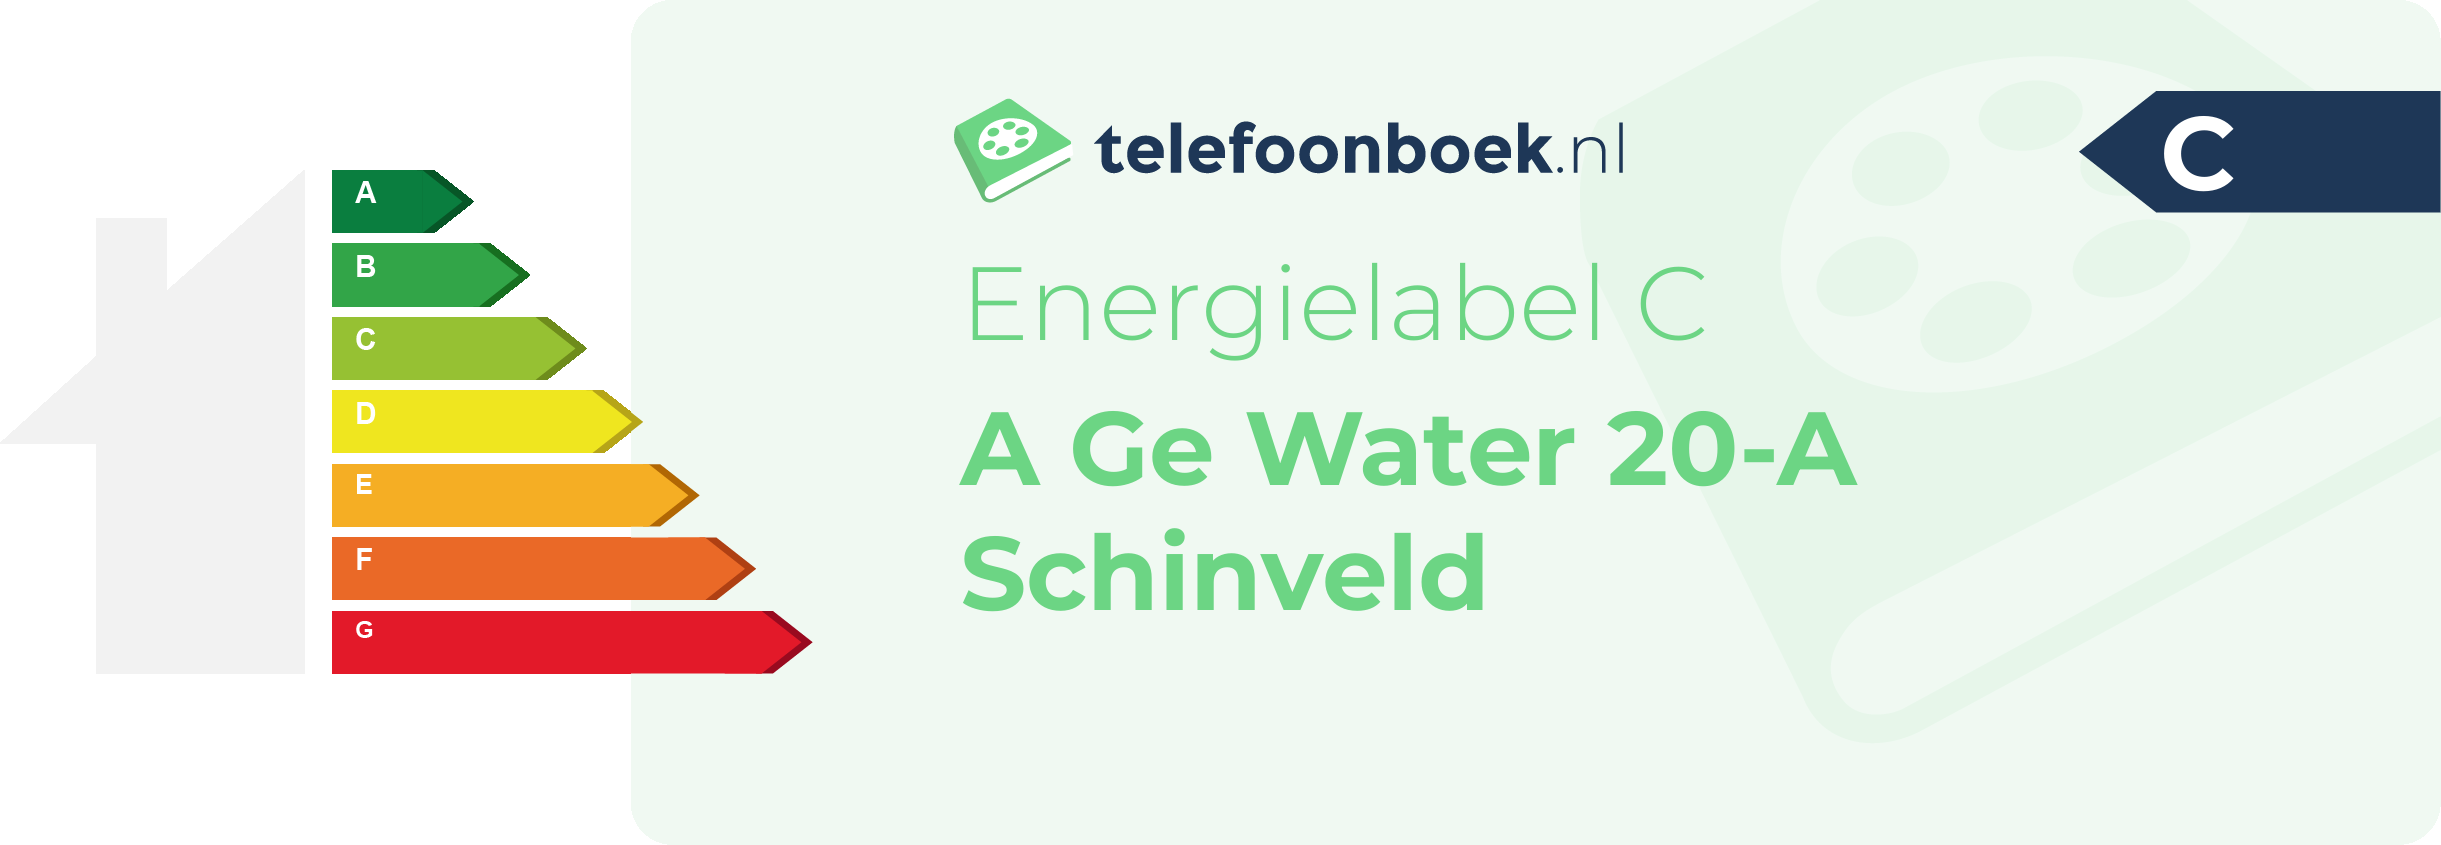 Energielabel A Ge Water 20-A Schinveld